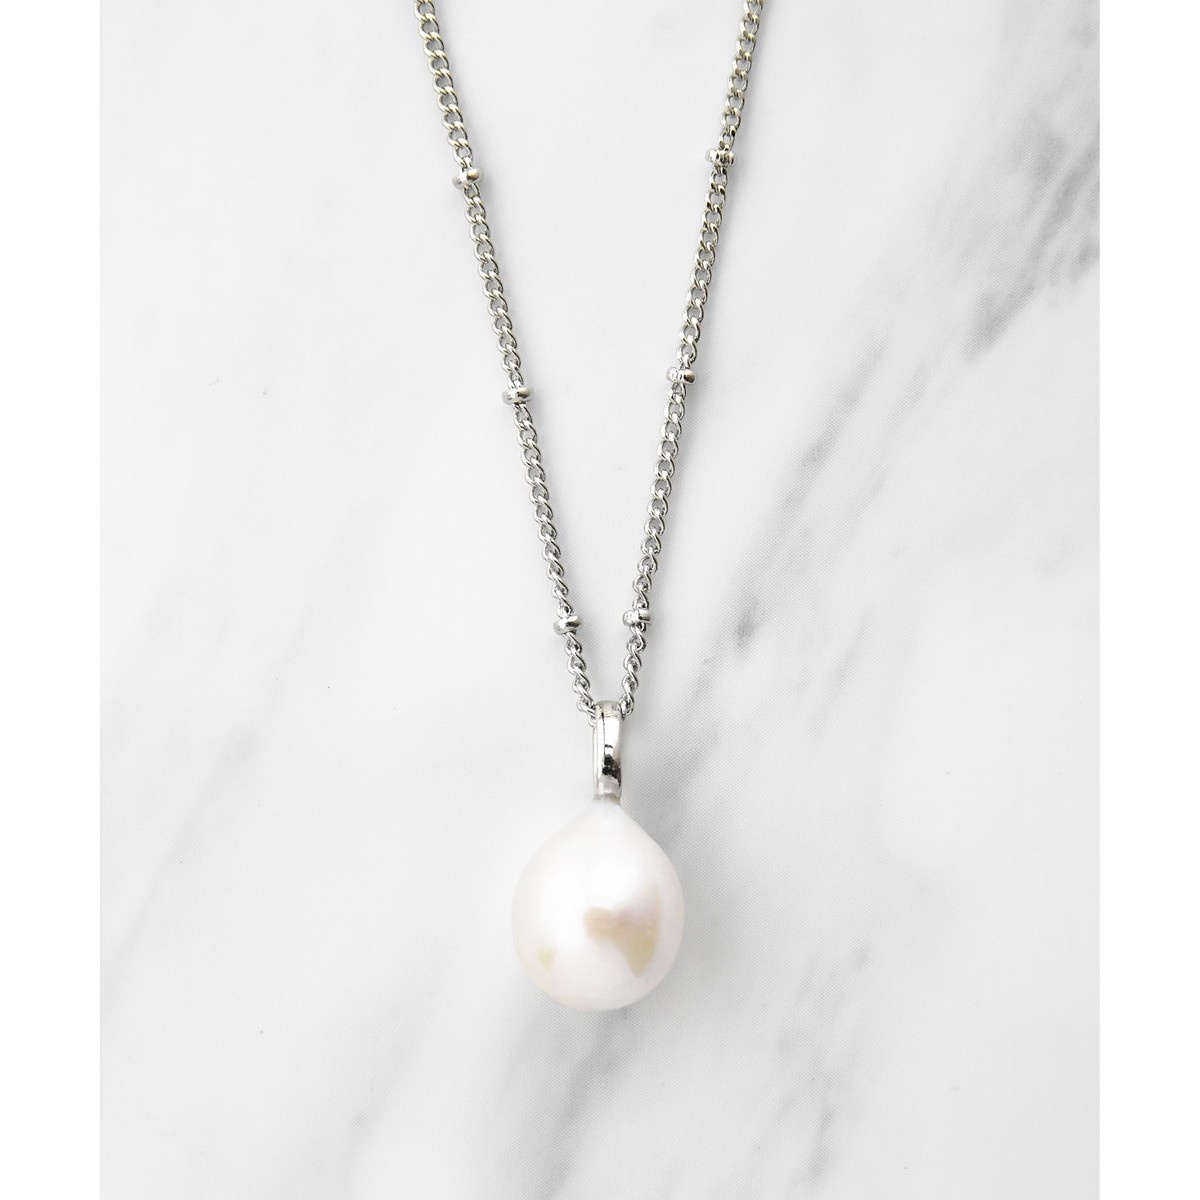 NOBLE PEARL NECKLACE 淡水バロックパール ネックレス | トッカ(TOCCA